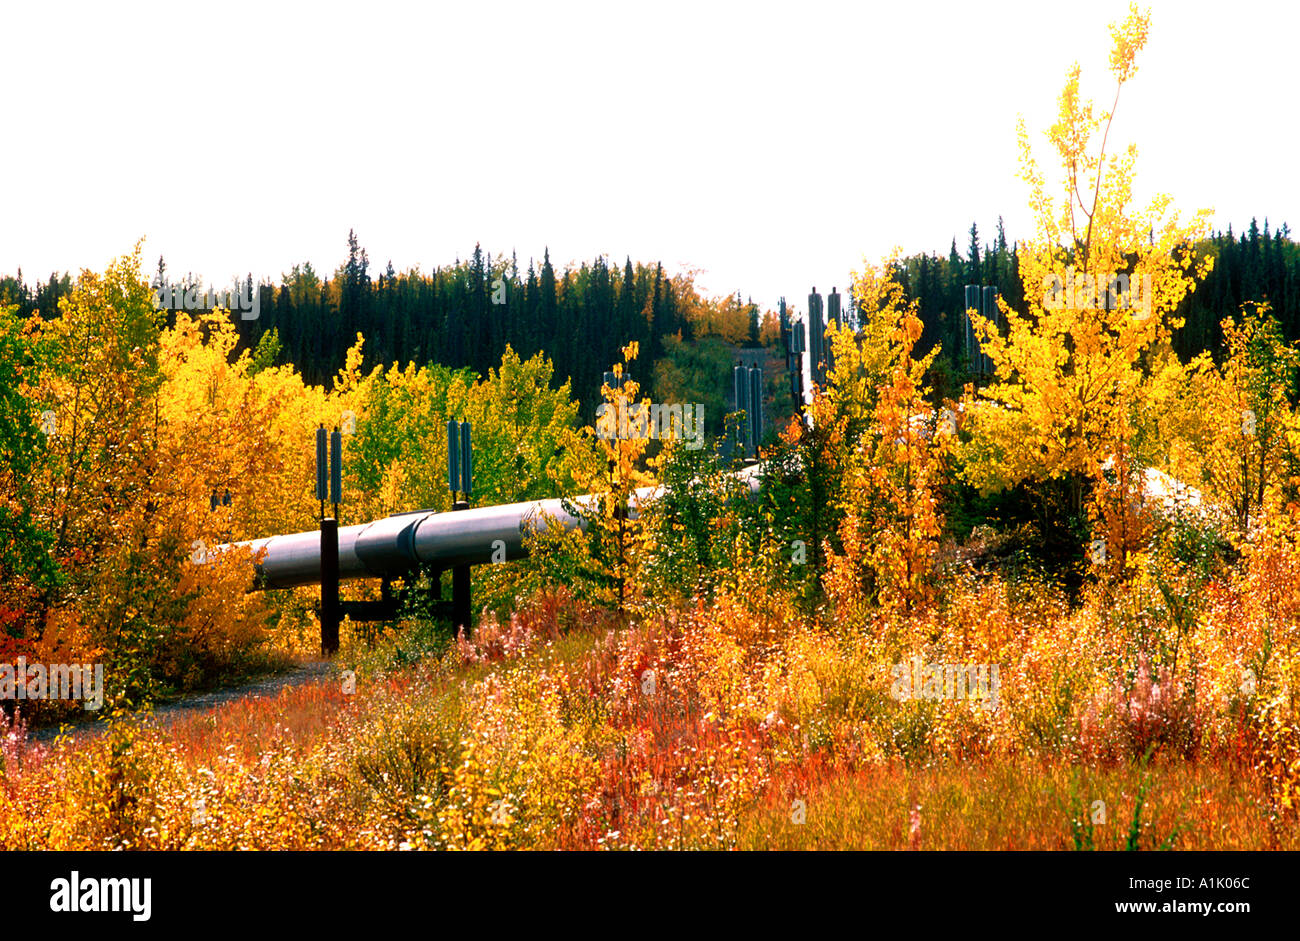 Alaska Oil Pipeline running 800 miles from Prudhoe Bay on the Arctic Ocean to Valdez on the Gulf of Alaska in the south USA Stock Photo